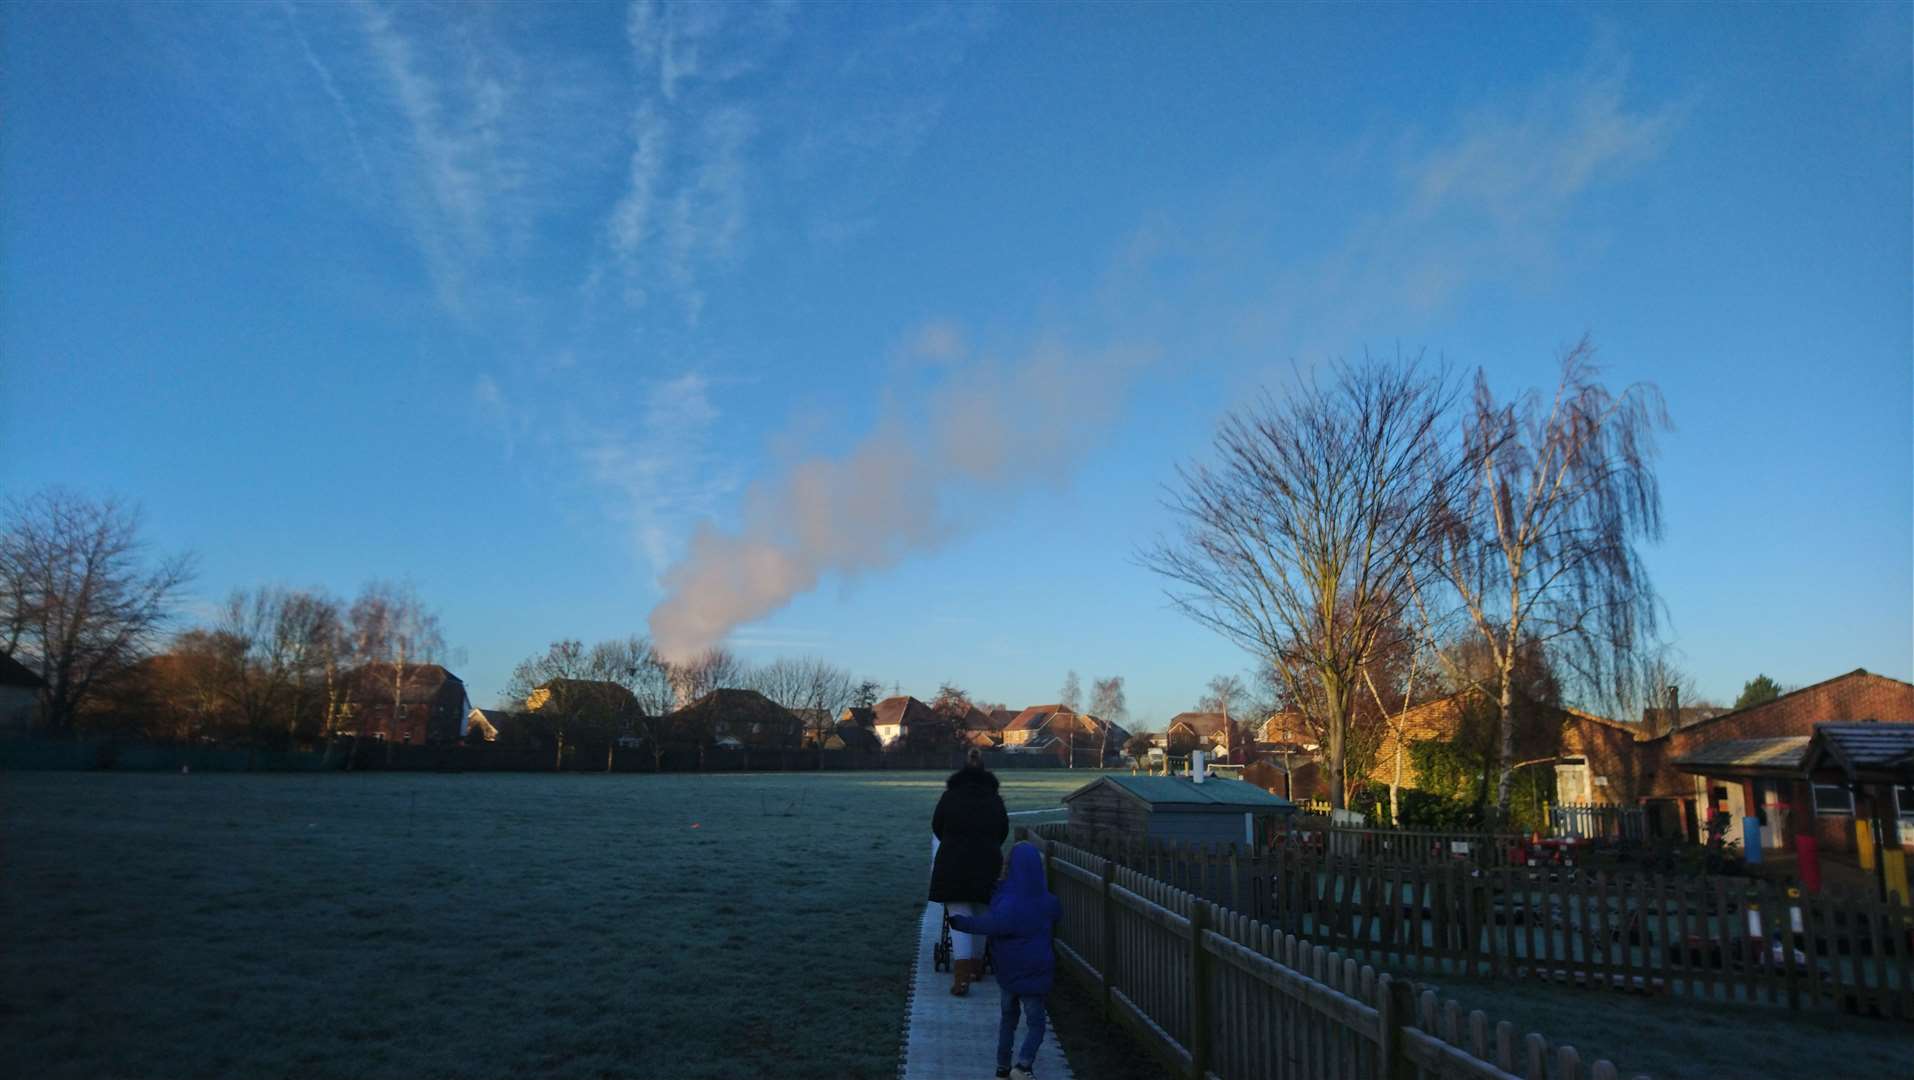 The plume could be seen on the way to work